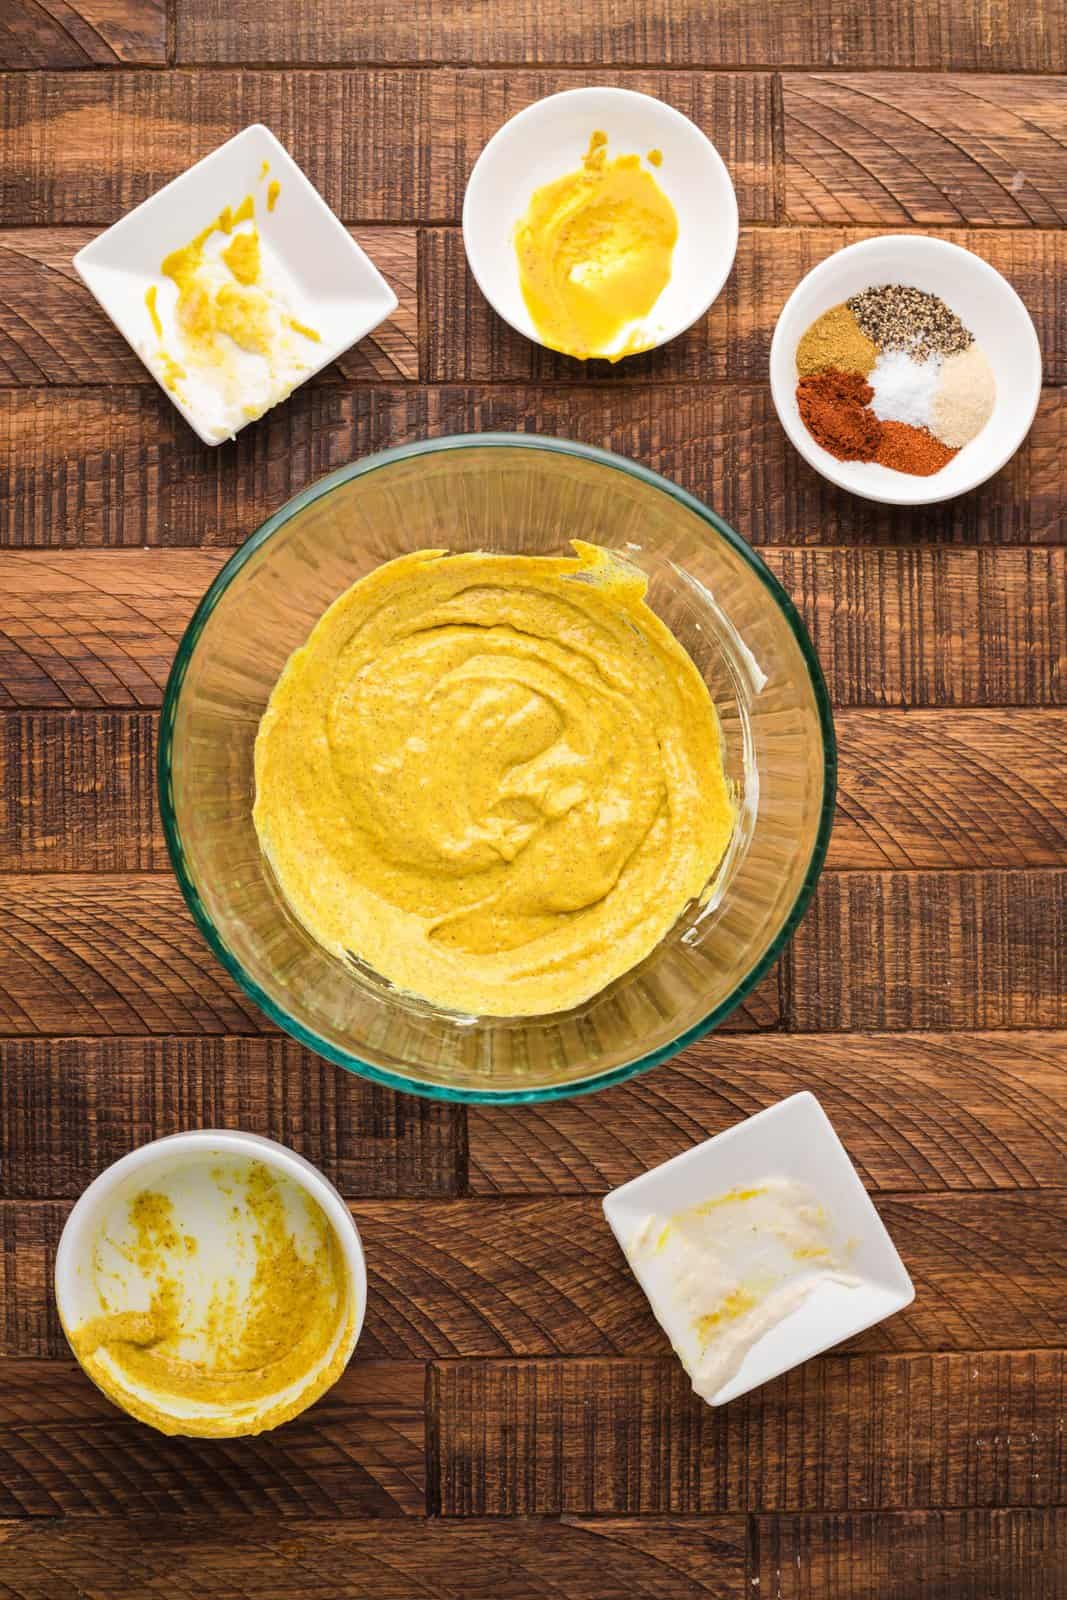 Mustard paste mixed together in bowl.